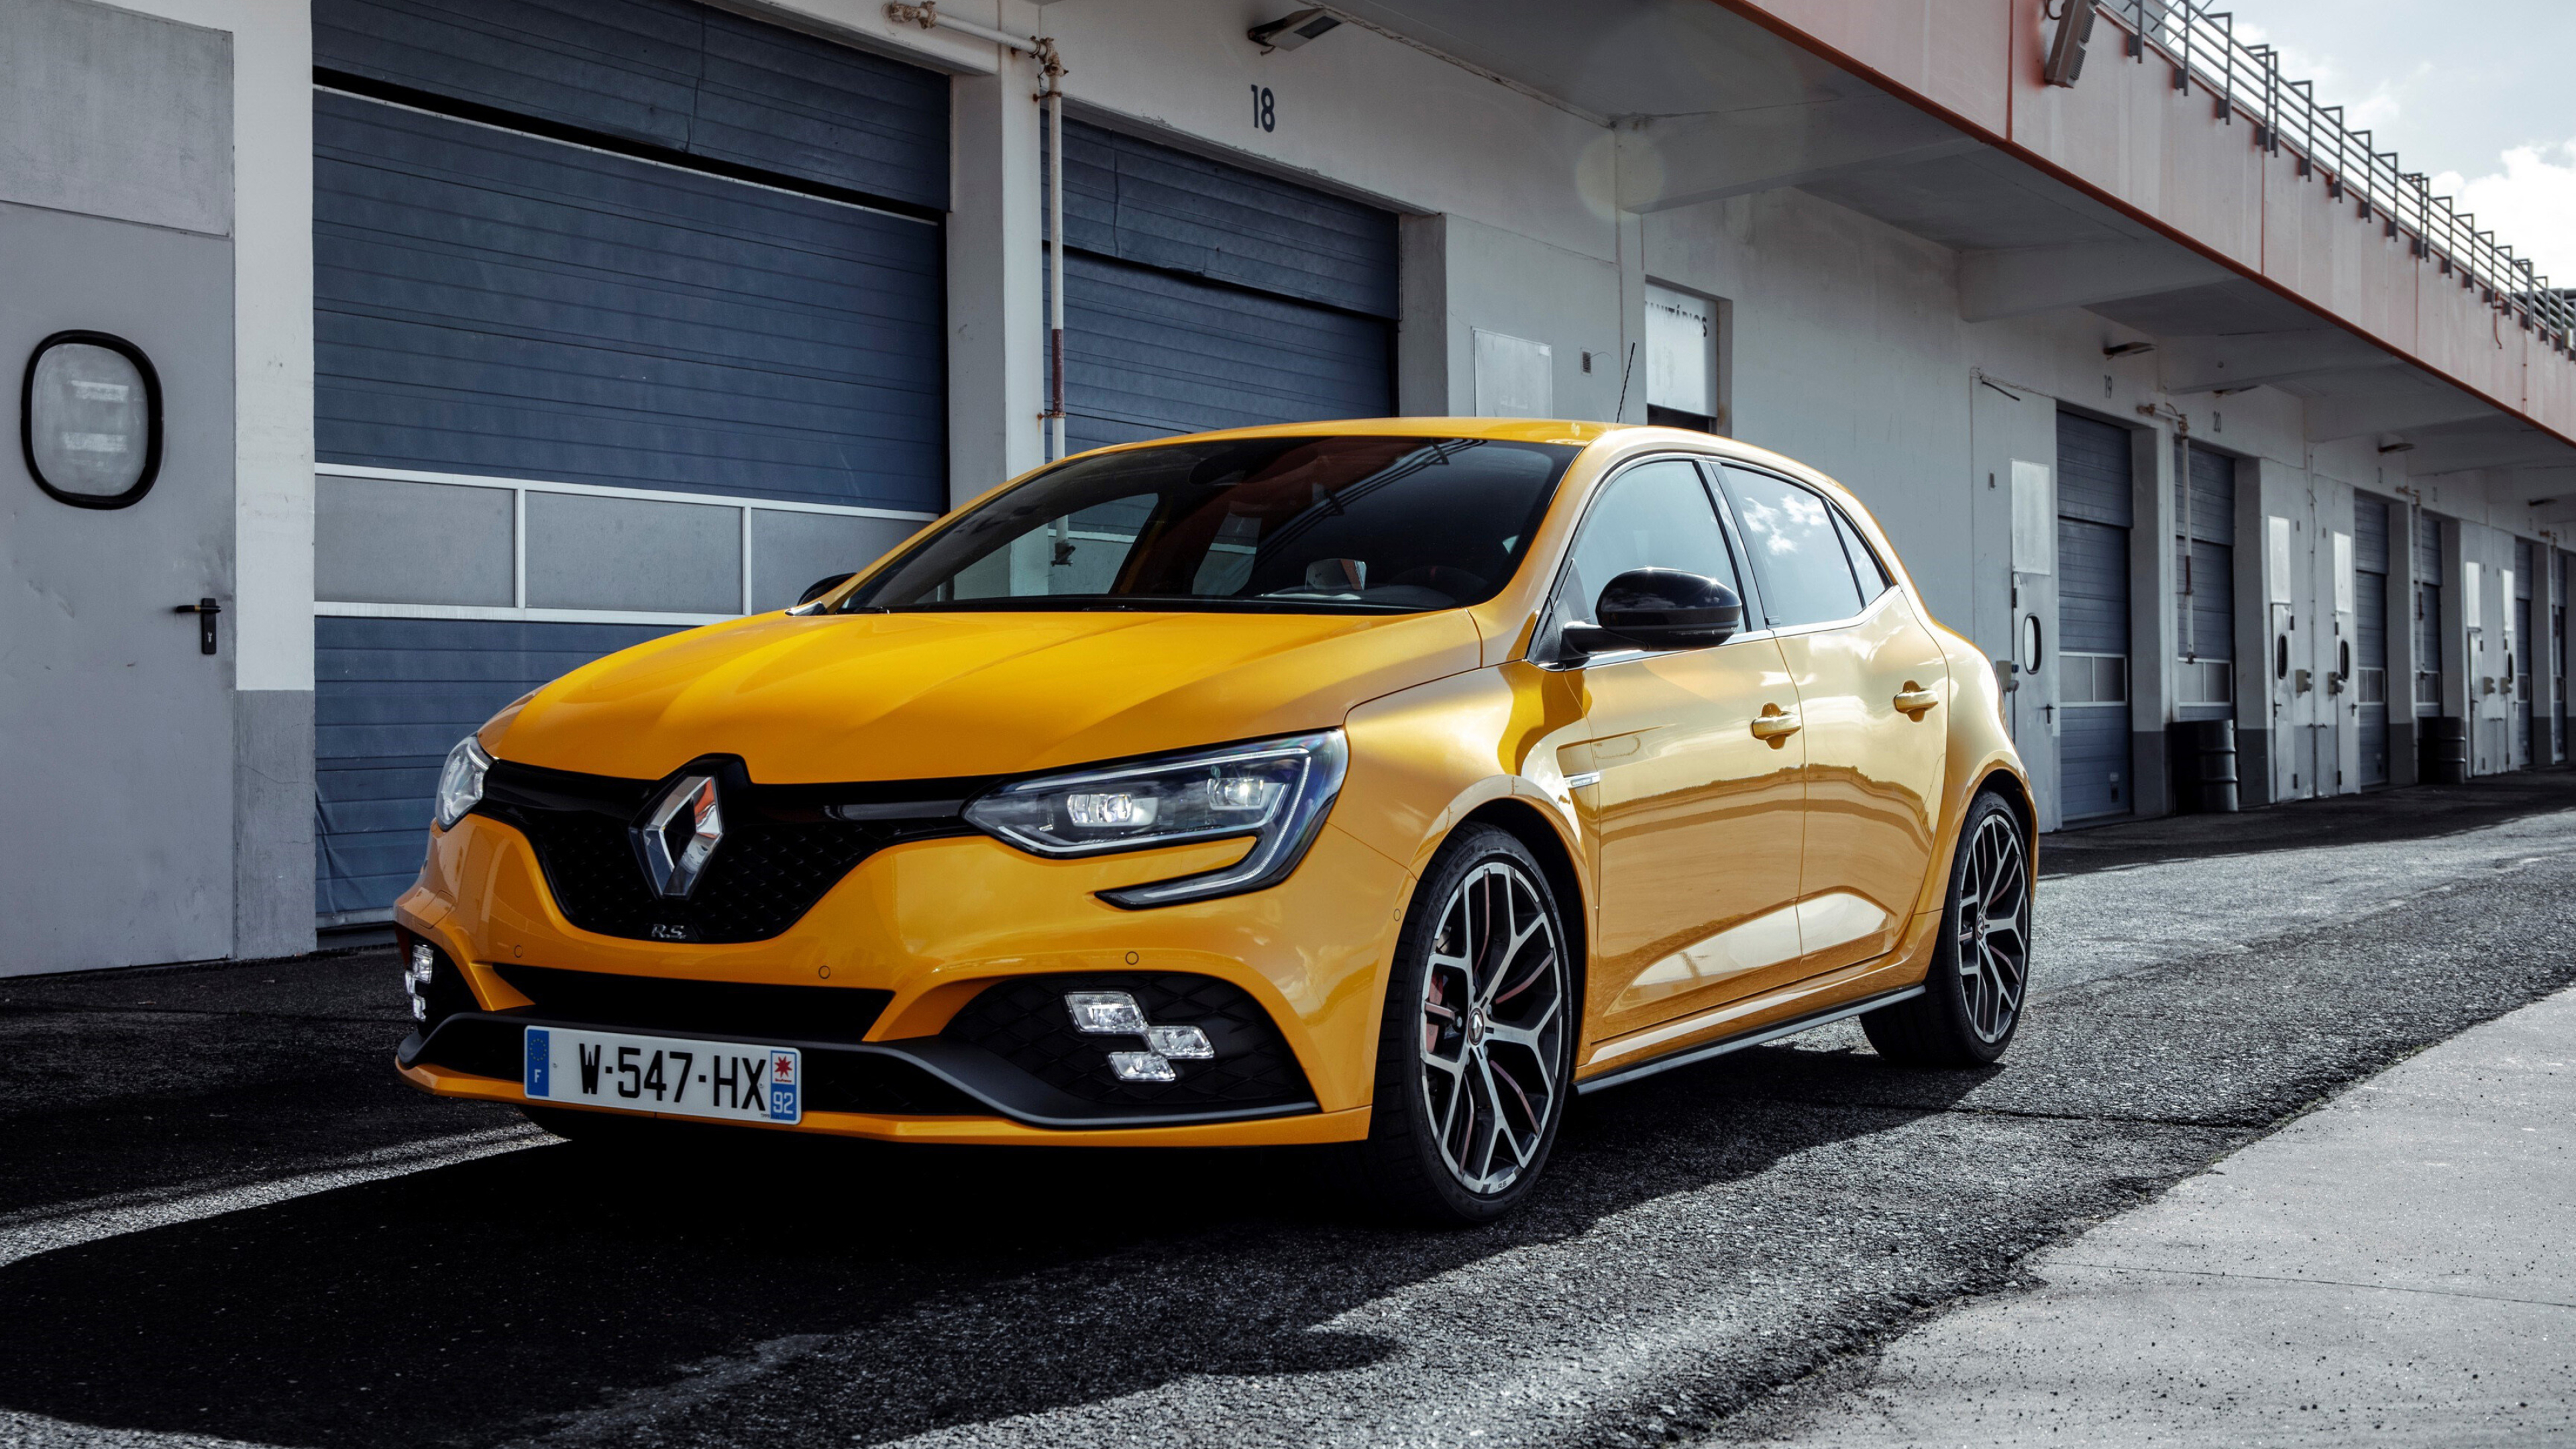 Renault: An international company with French roots, Megane R.S. Trophy. 3840x2160 4K Wallpaper.